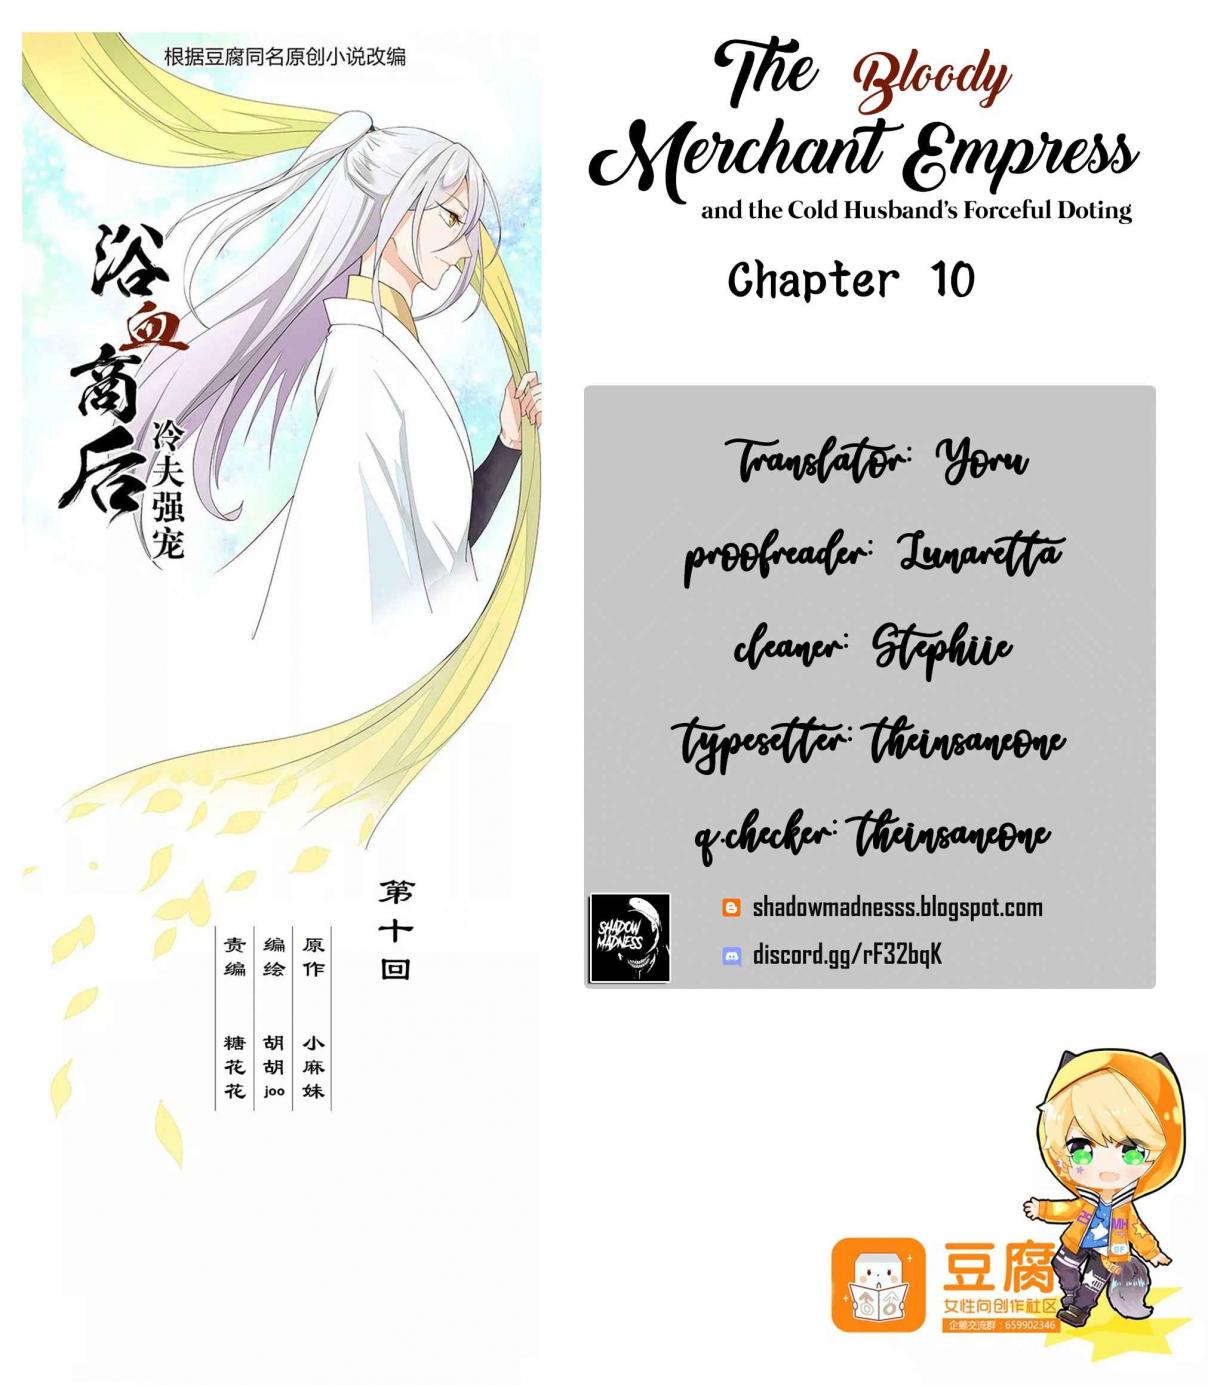 The Bloody Merchant Empress and the Cold Husband's Forceful Doting Ch. 10